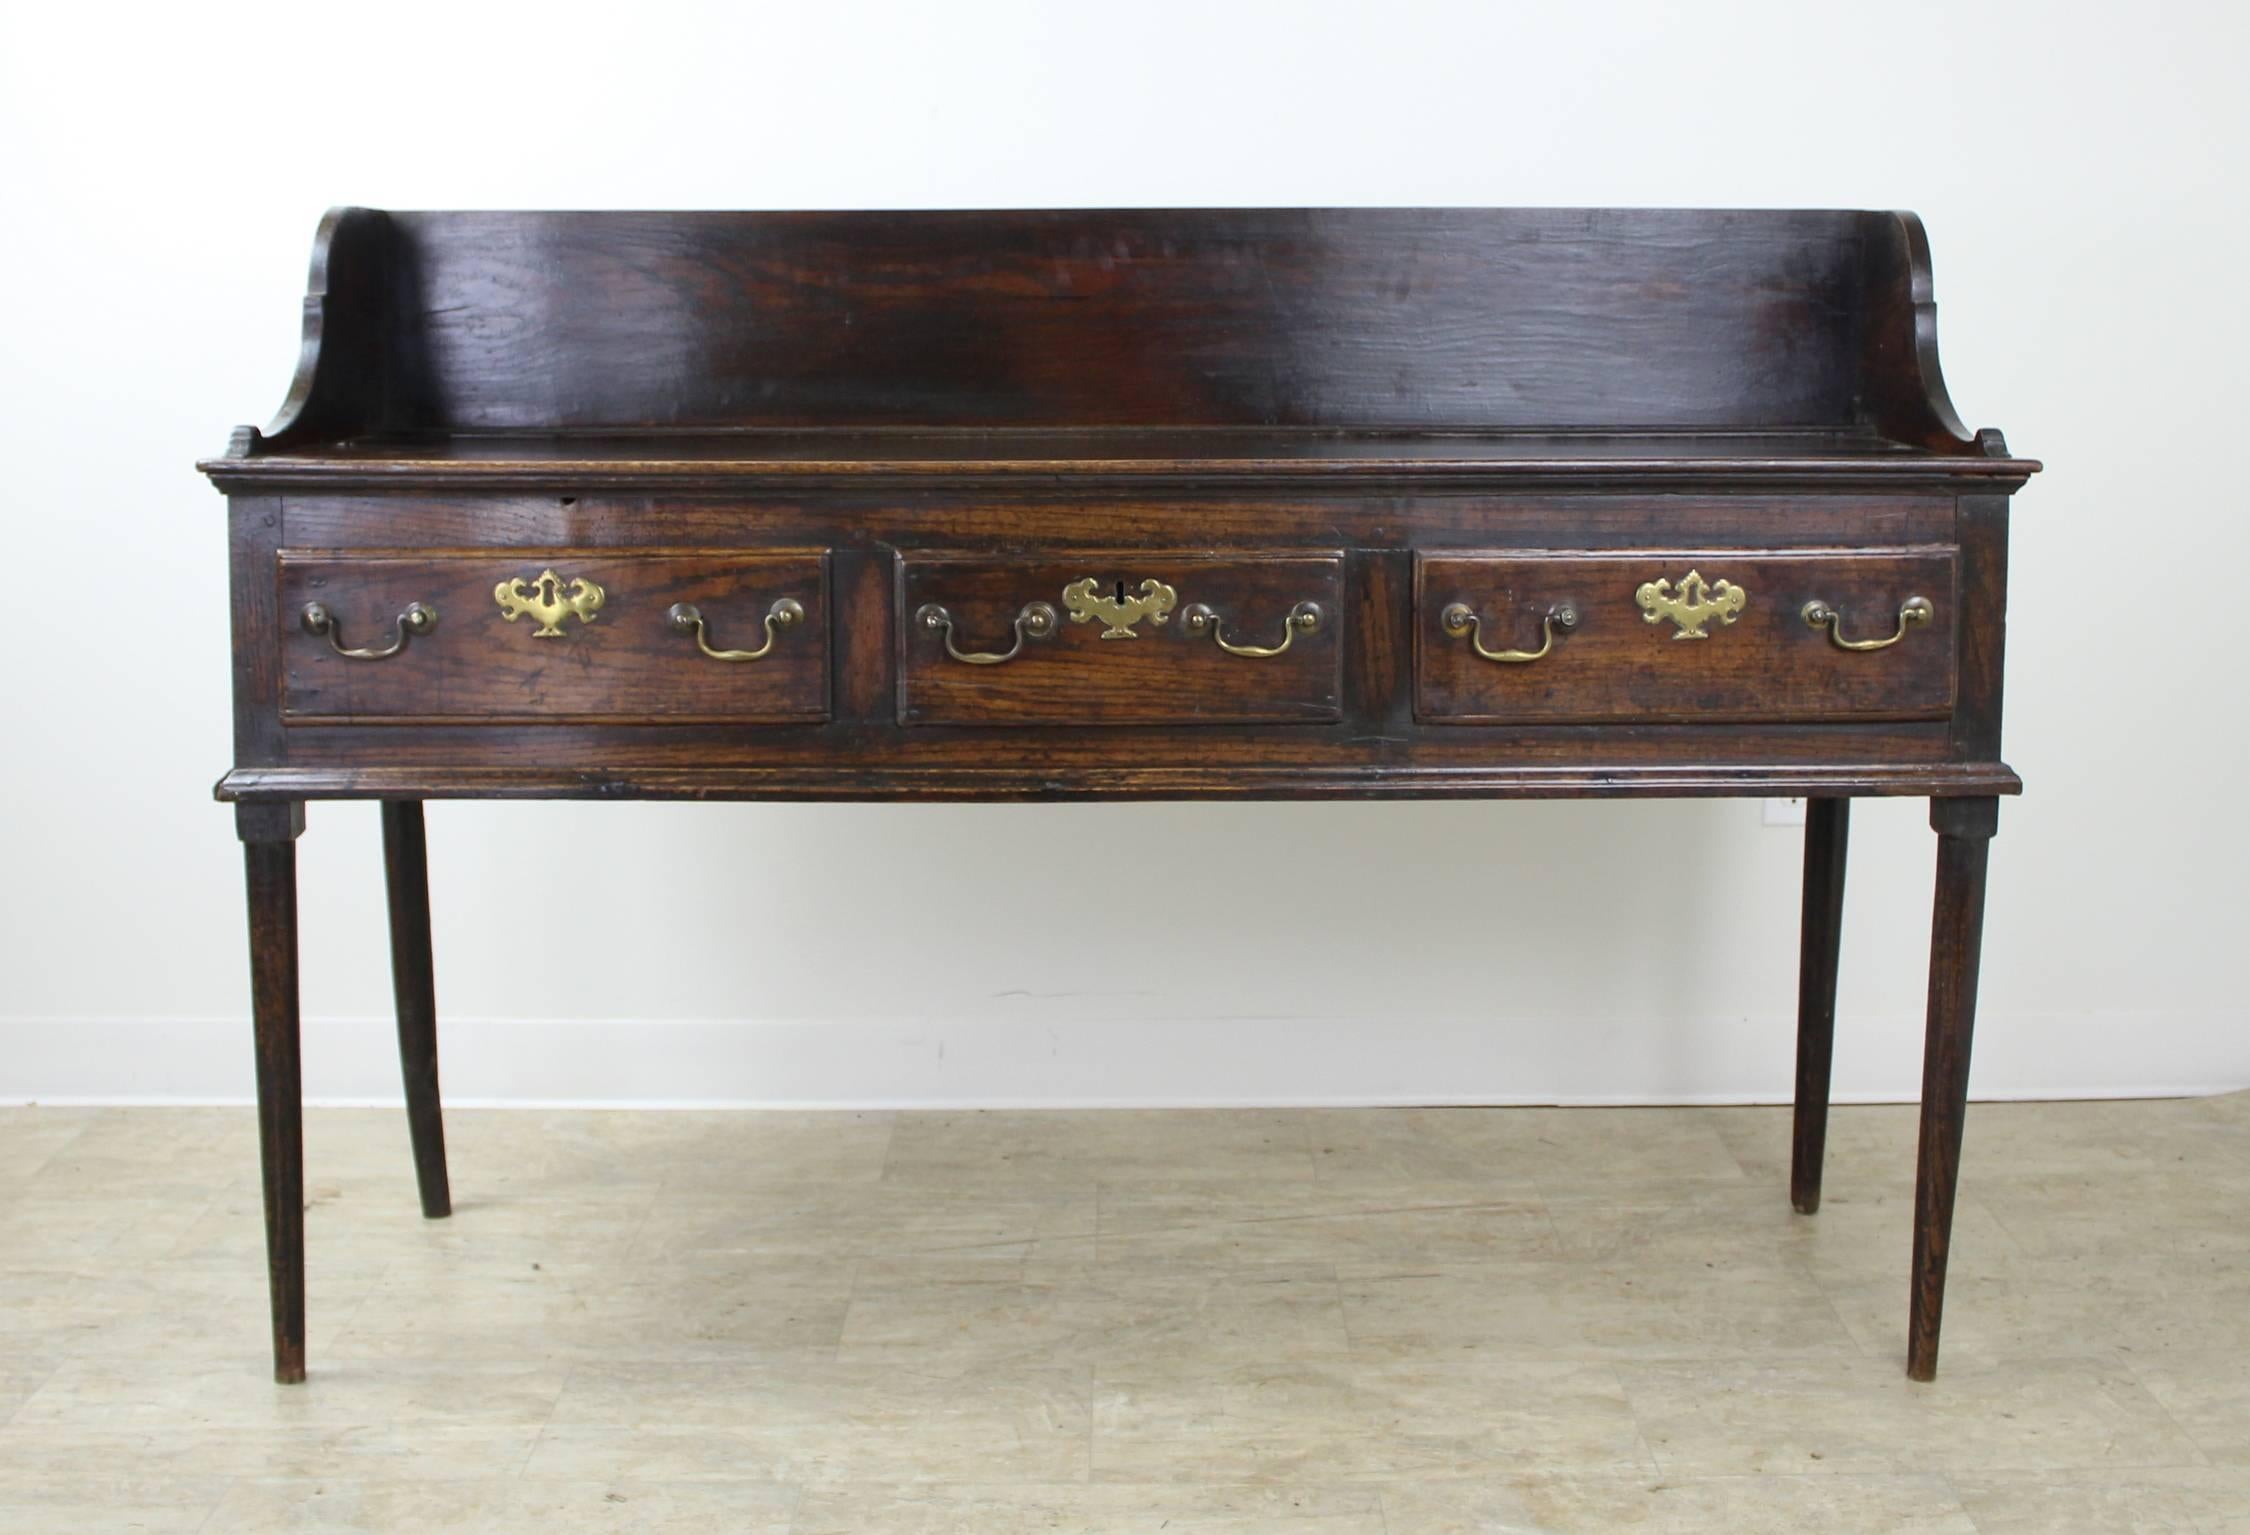 An early English period oak server with lovely grain and gorgeous wear and patina. The galleried back has a plate stop for display and the entire piece is trimmed with decorative mouldings. Three roomy drawers provide excellent storage. One of the